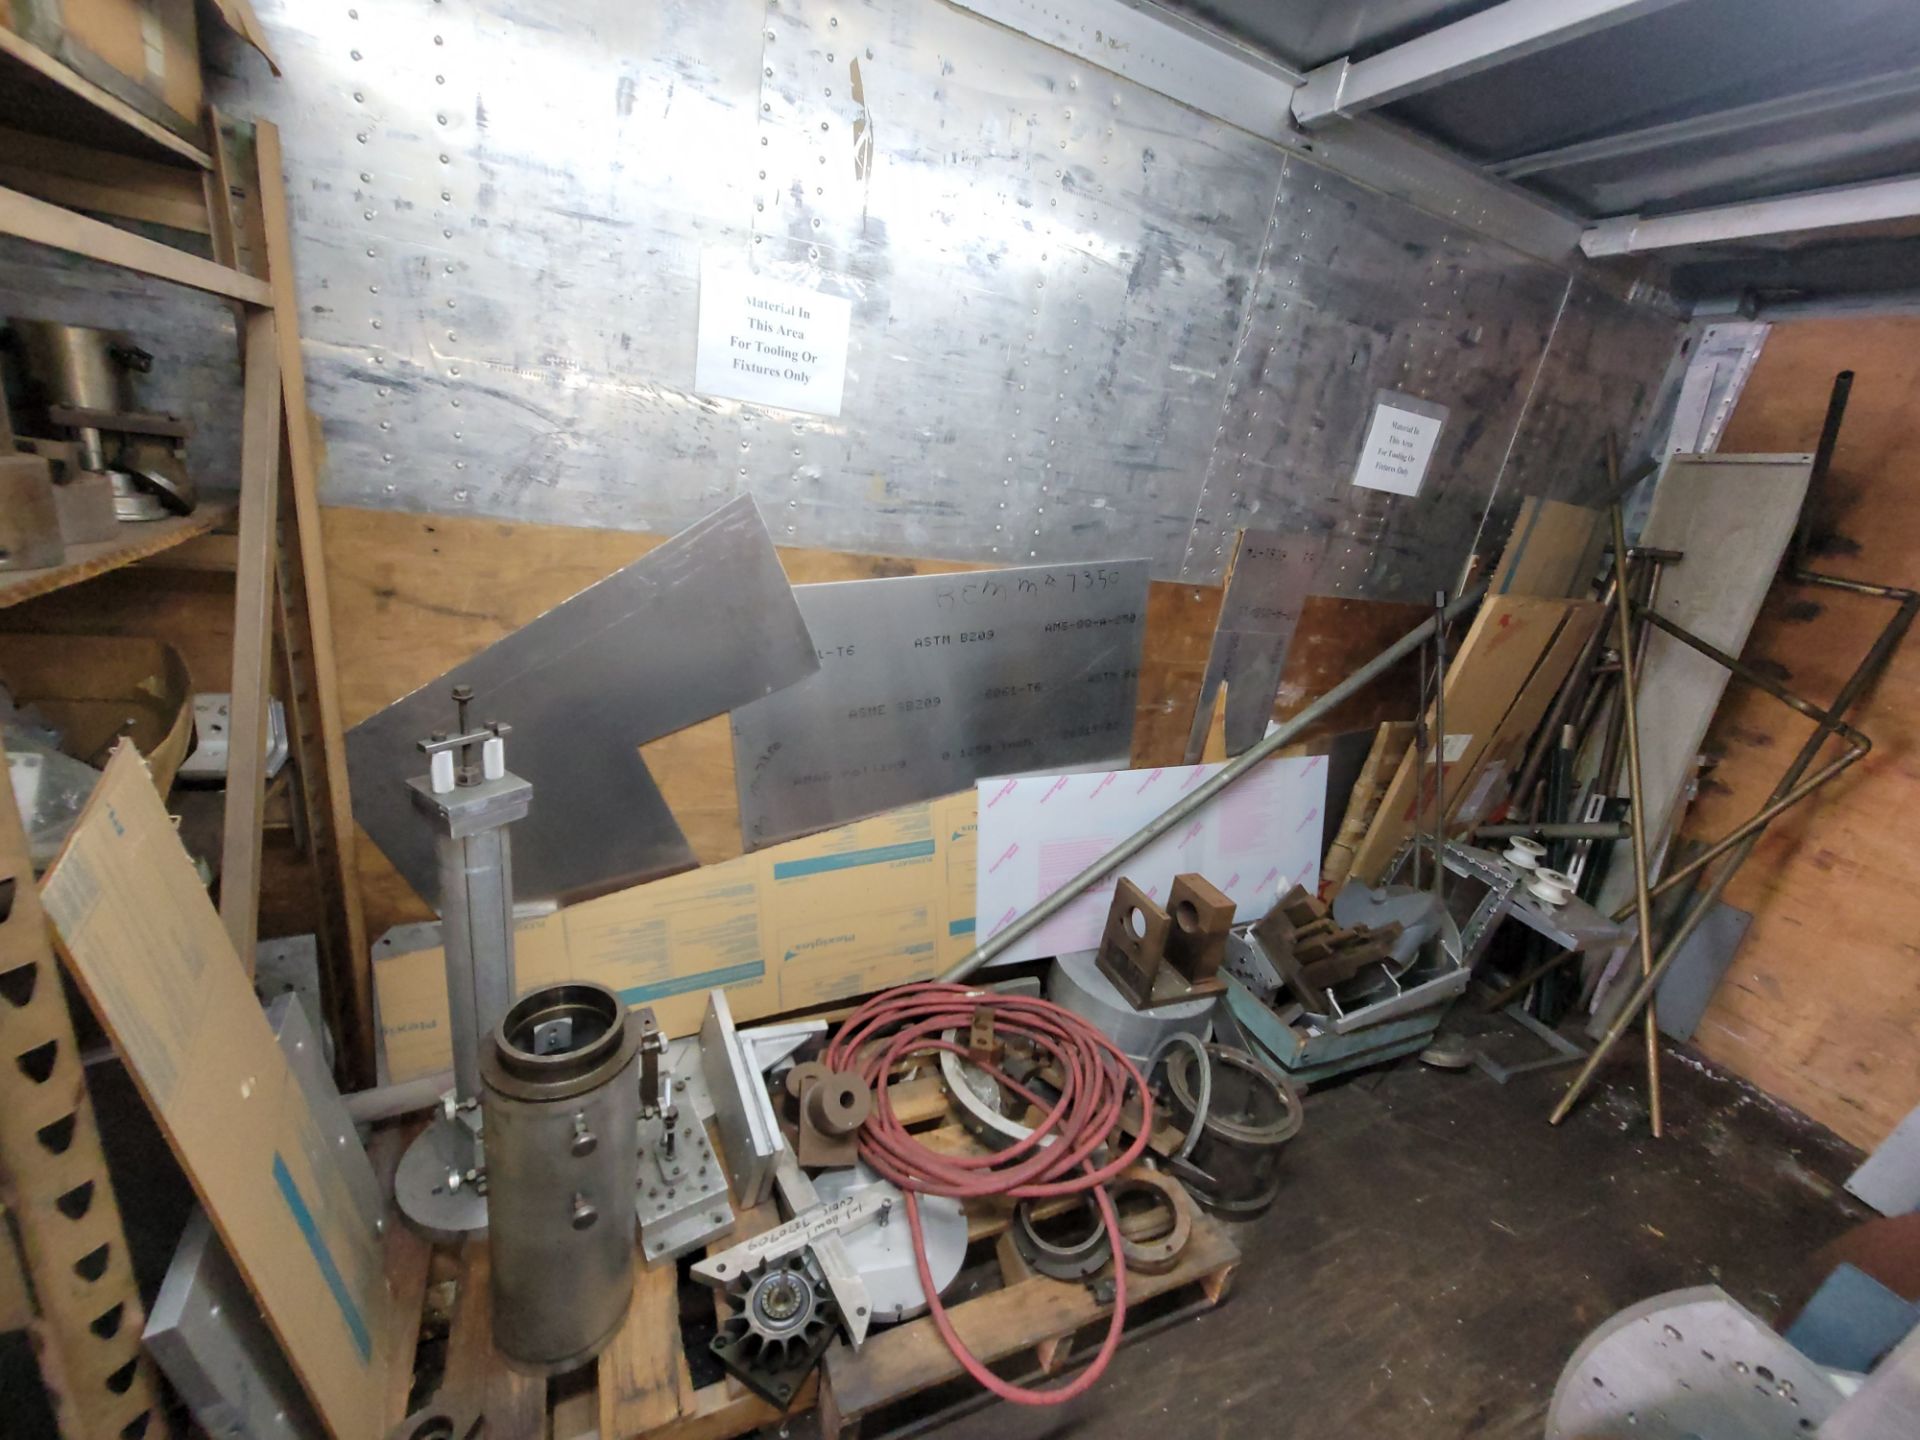 LOT - CONTENTS ONLY OF LEFT SIDE OF SHIPPING CONTAINER, TO INCLUDE: MISC. SCRAP ALUMINUM, STEEL, - Image 6 of 6